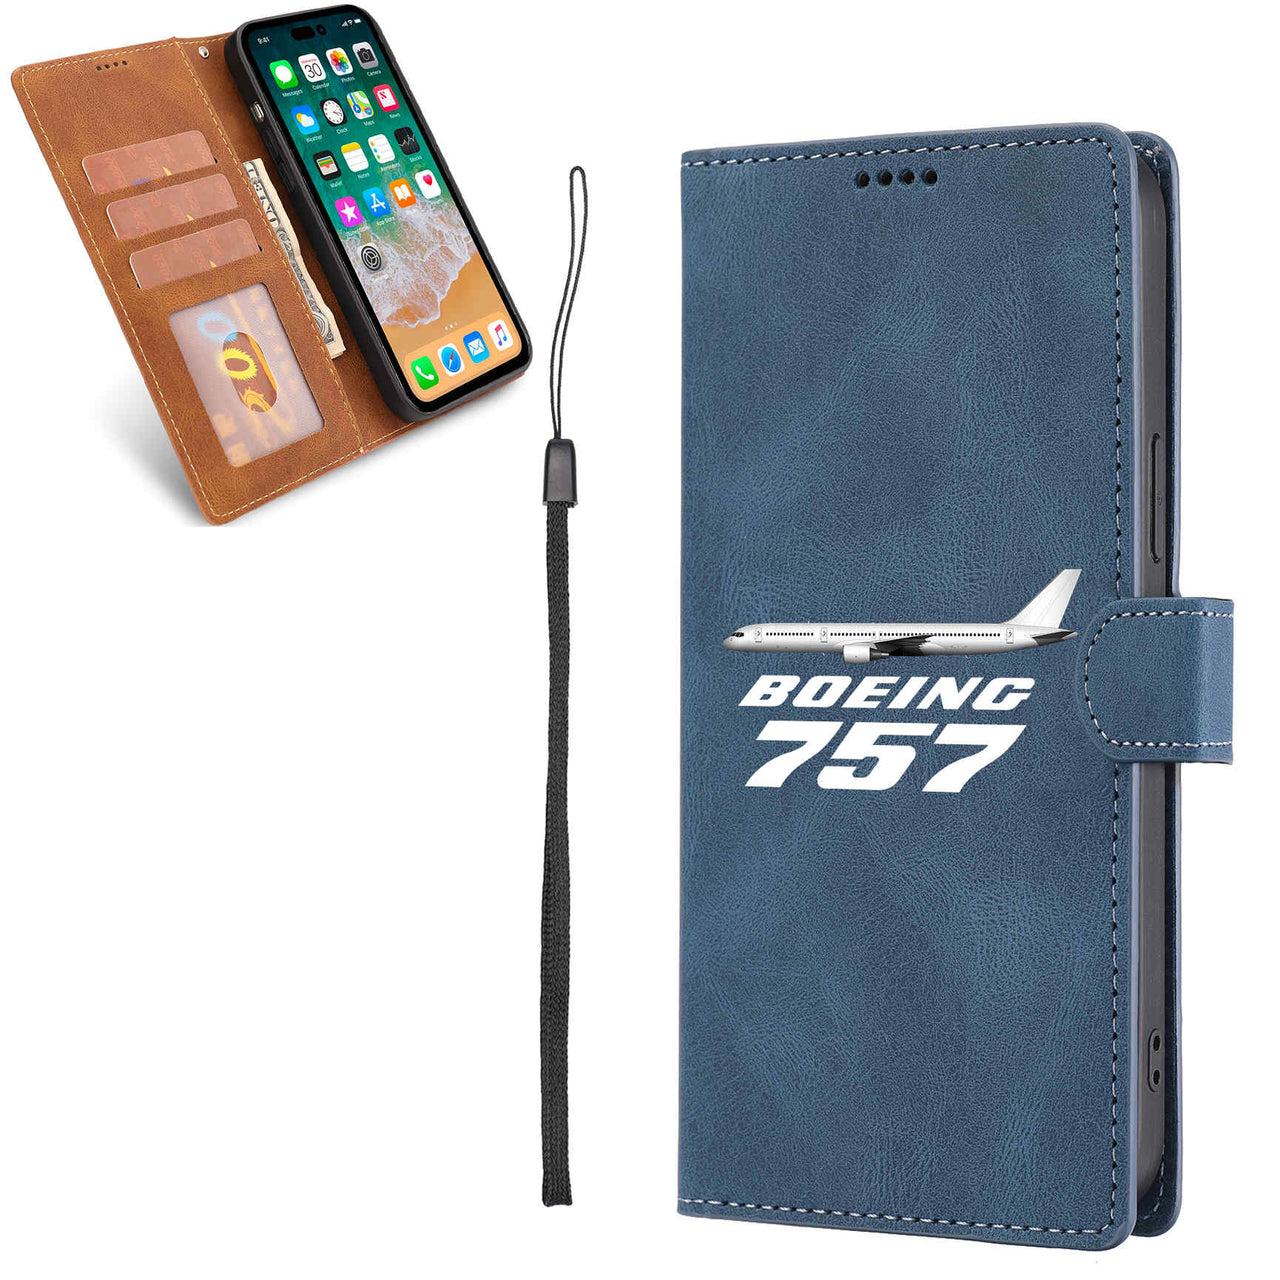 The Boeing 757 Leather Samsung A Cases